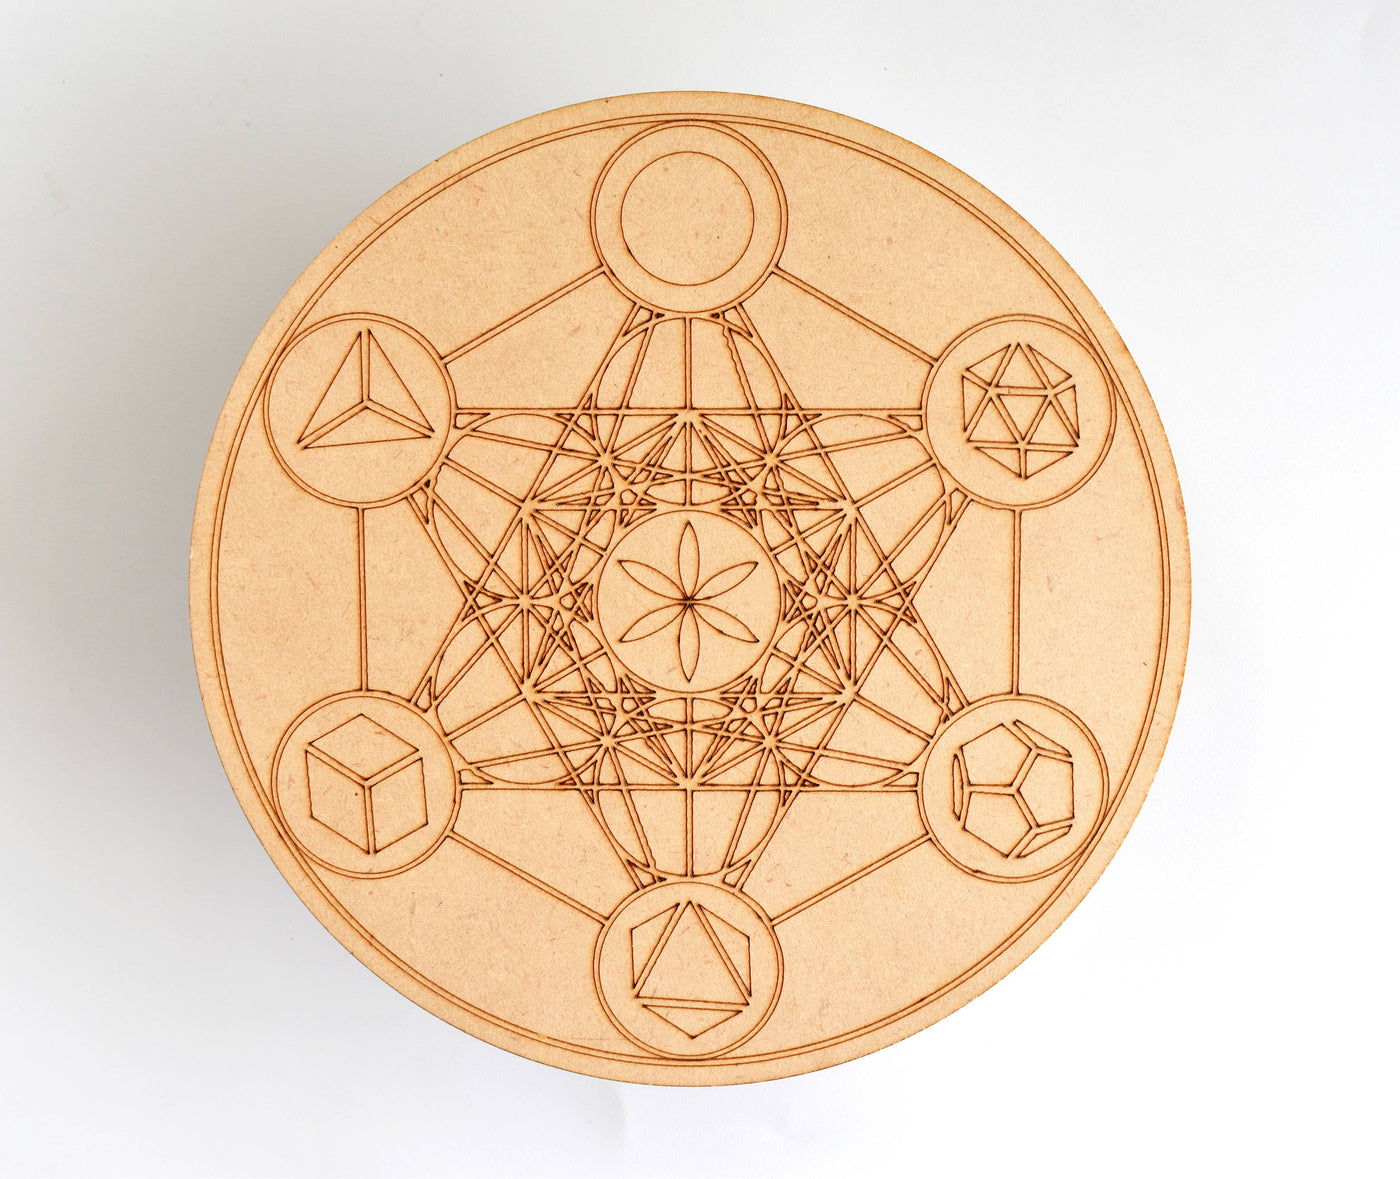 Moon Phase Crystal Grid Board, 6" Wooden Crystal Grid Plate